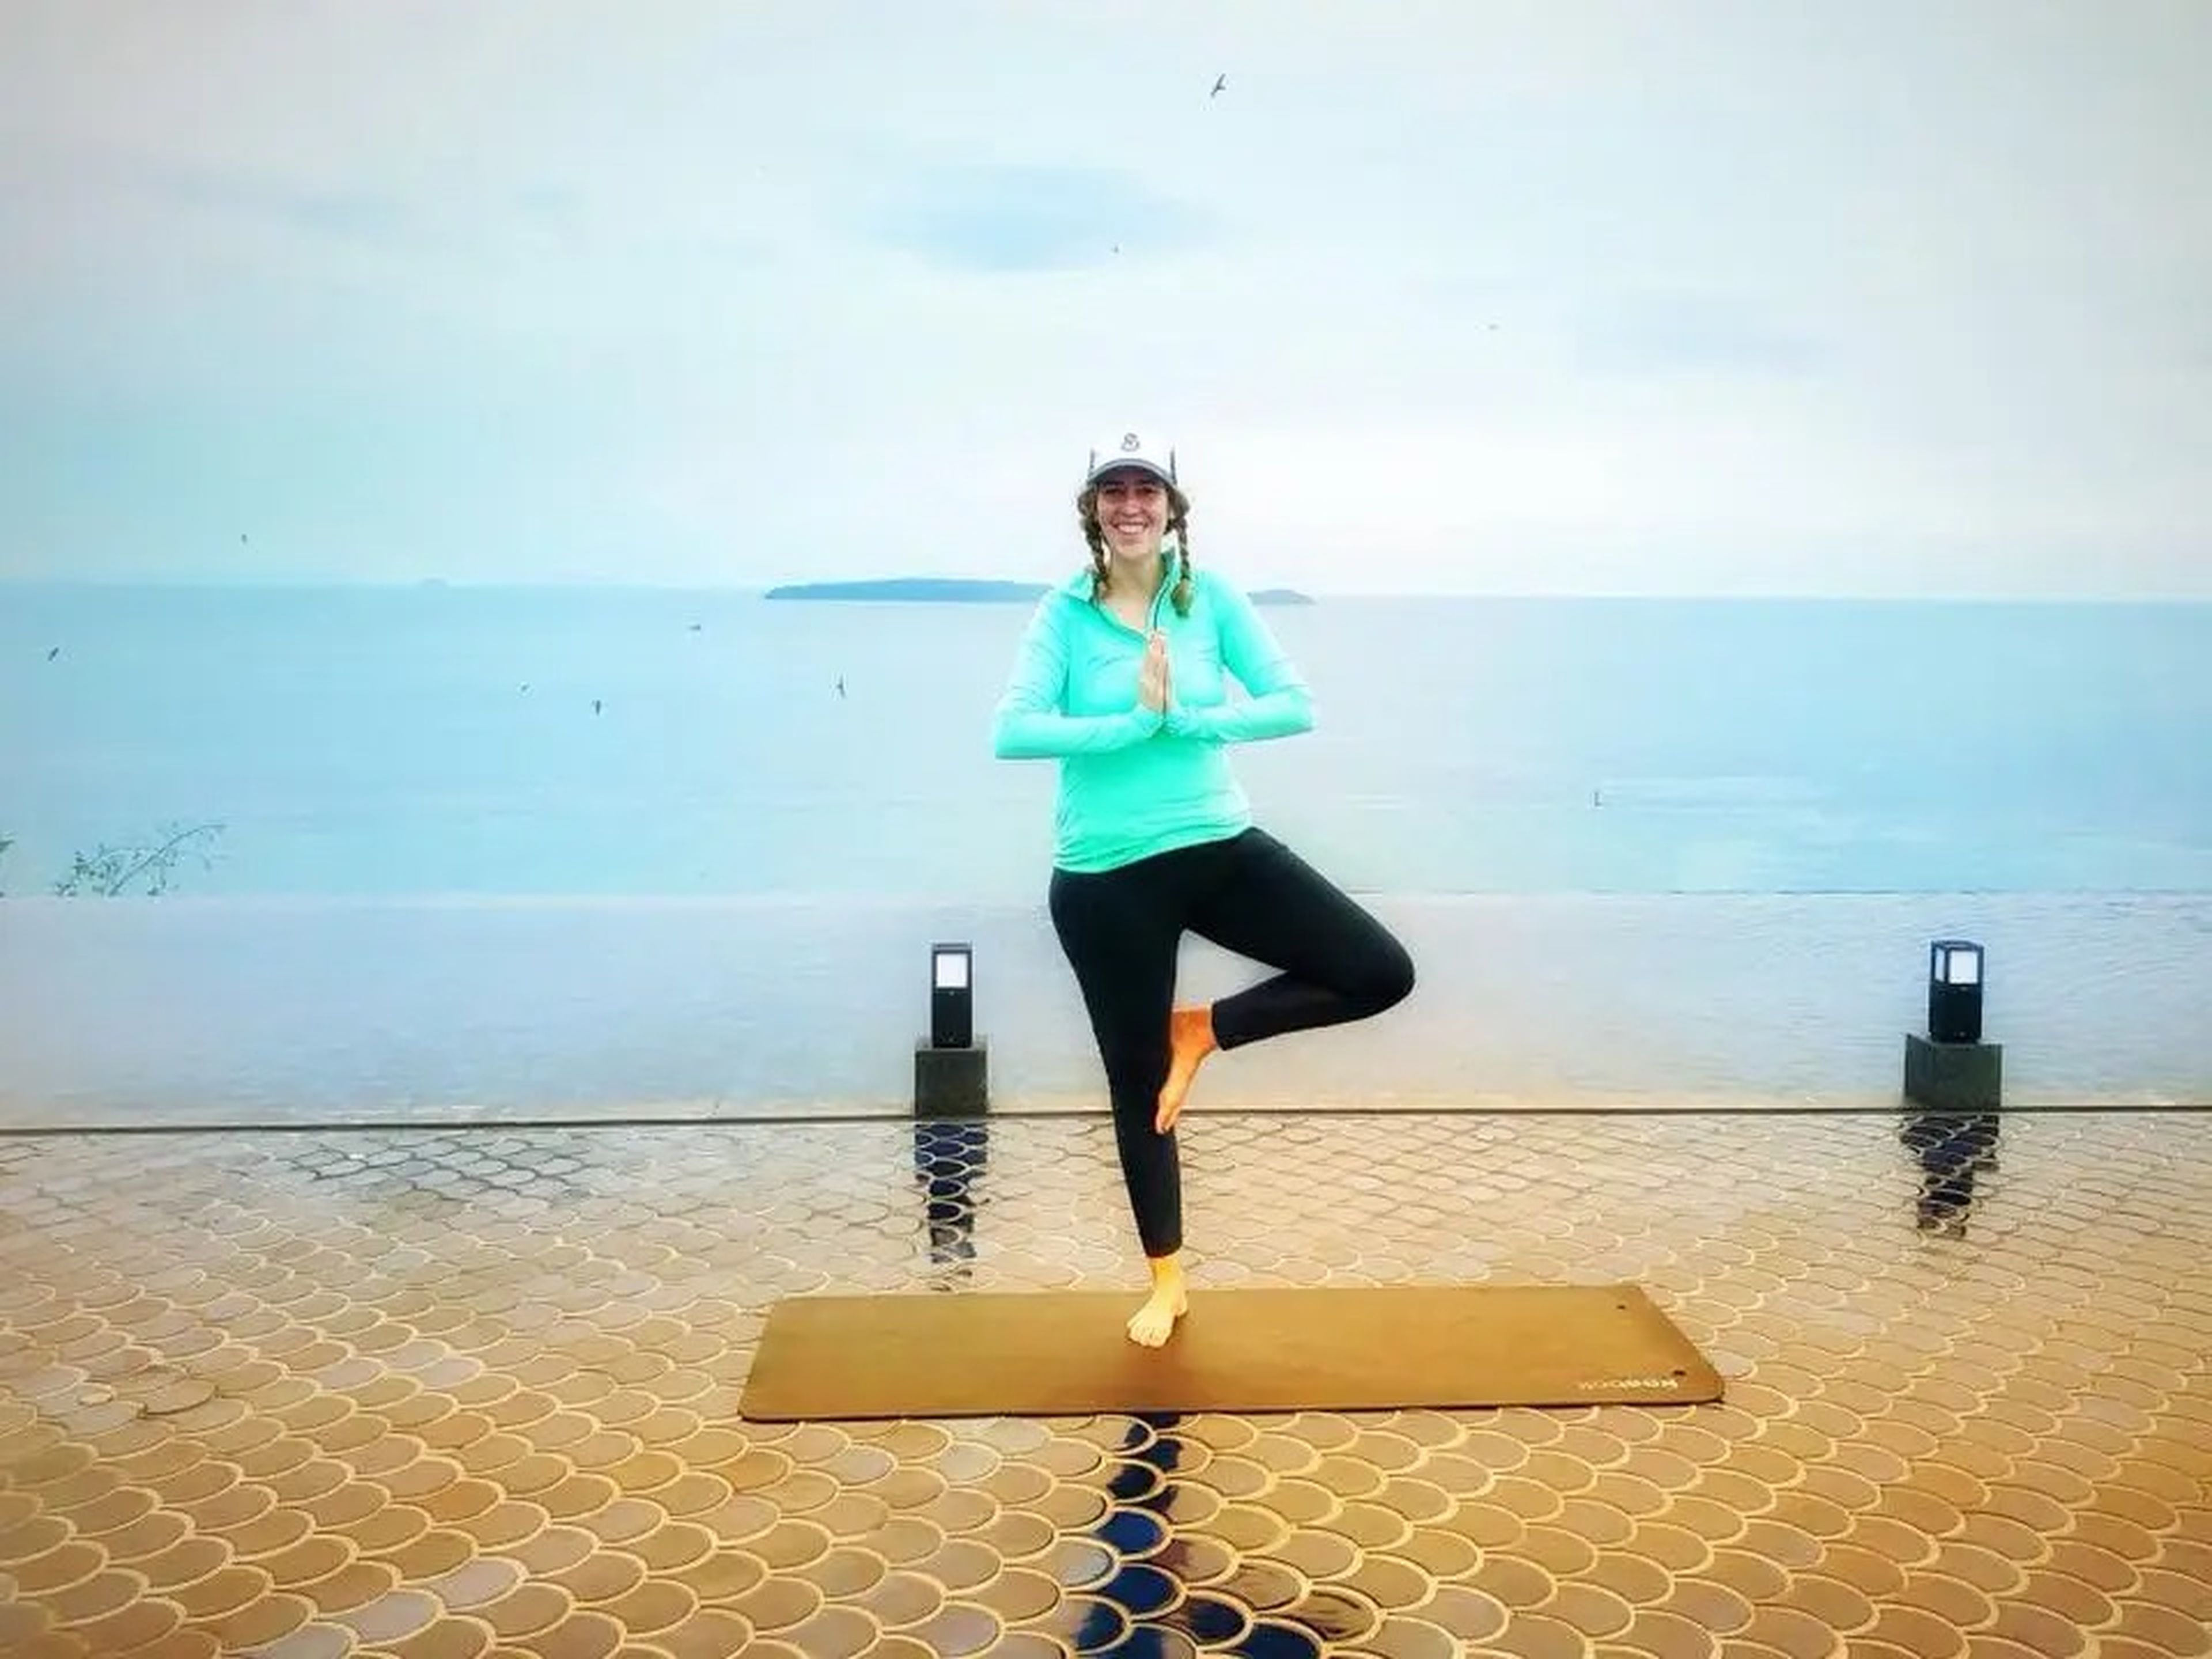 Michelle Gross practicing yoga on her solo trip to Phuket, Thailand.